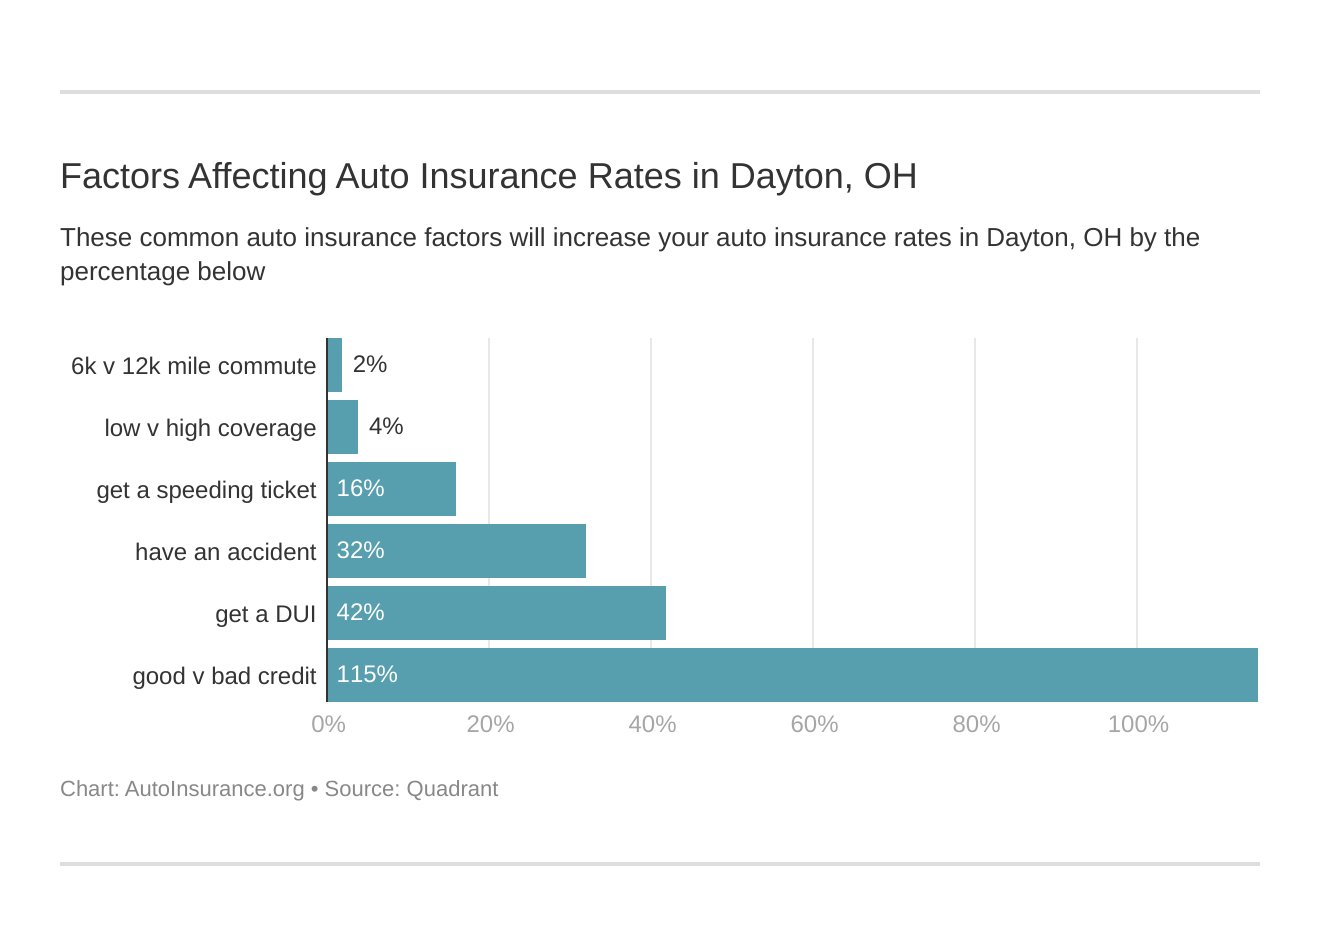 Factors Affecting Auto Insurance Rates in Dayton, OH